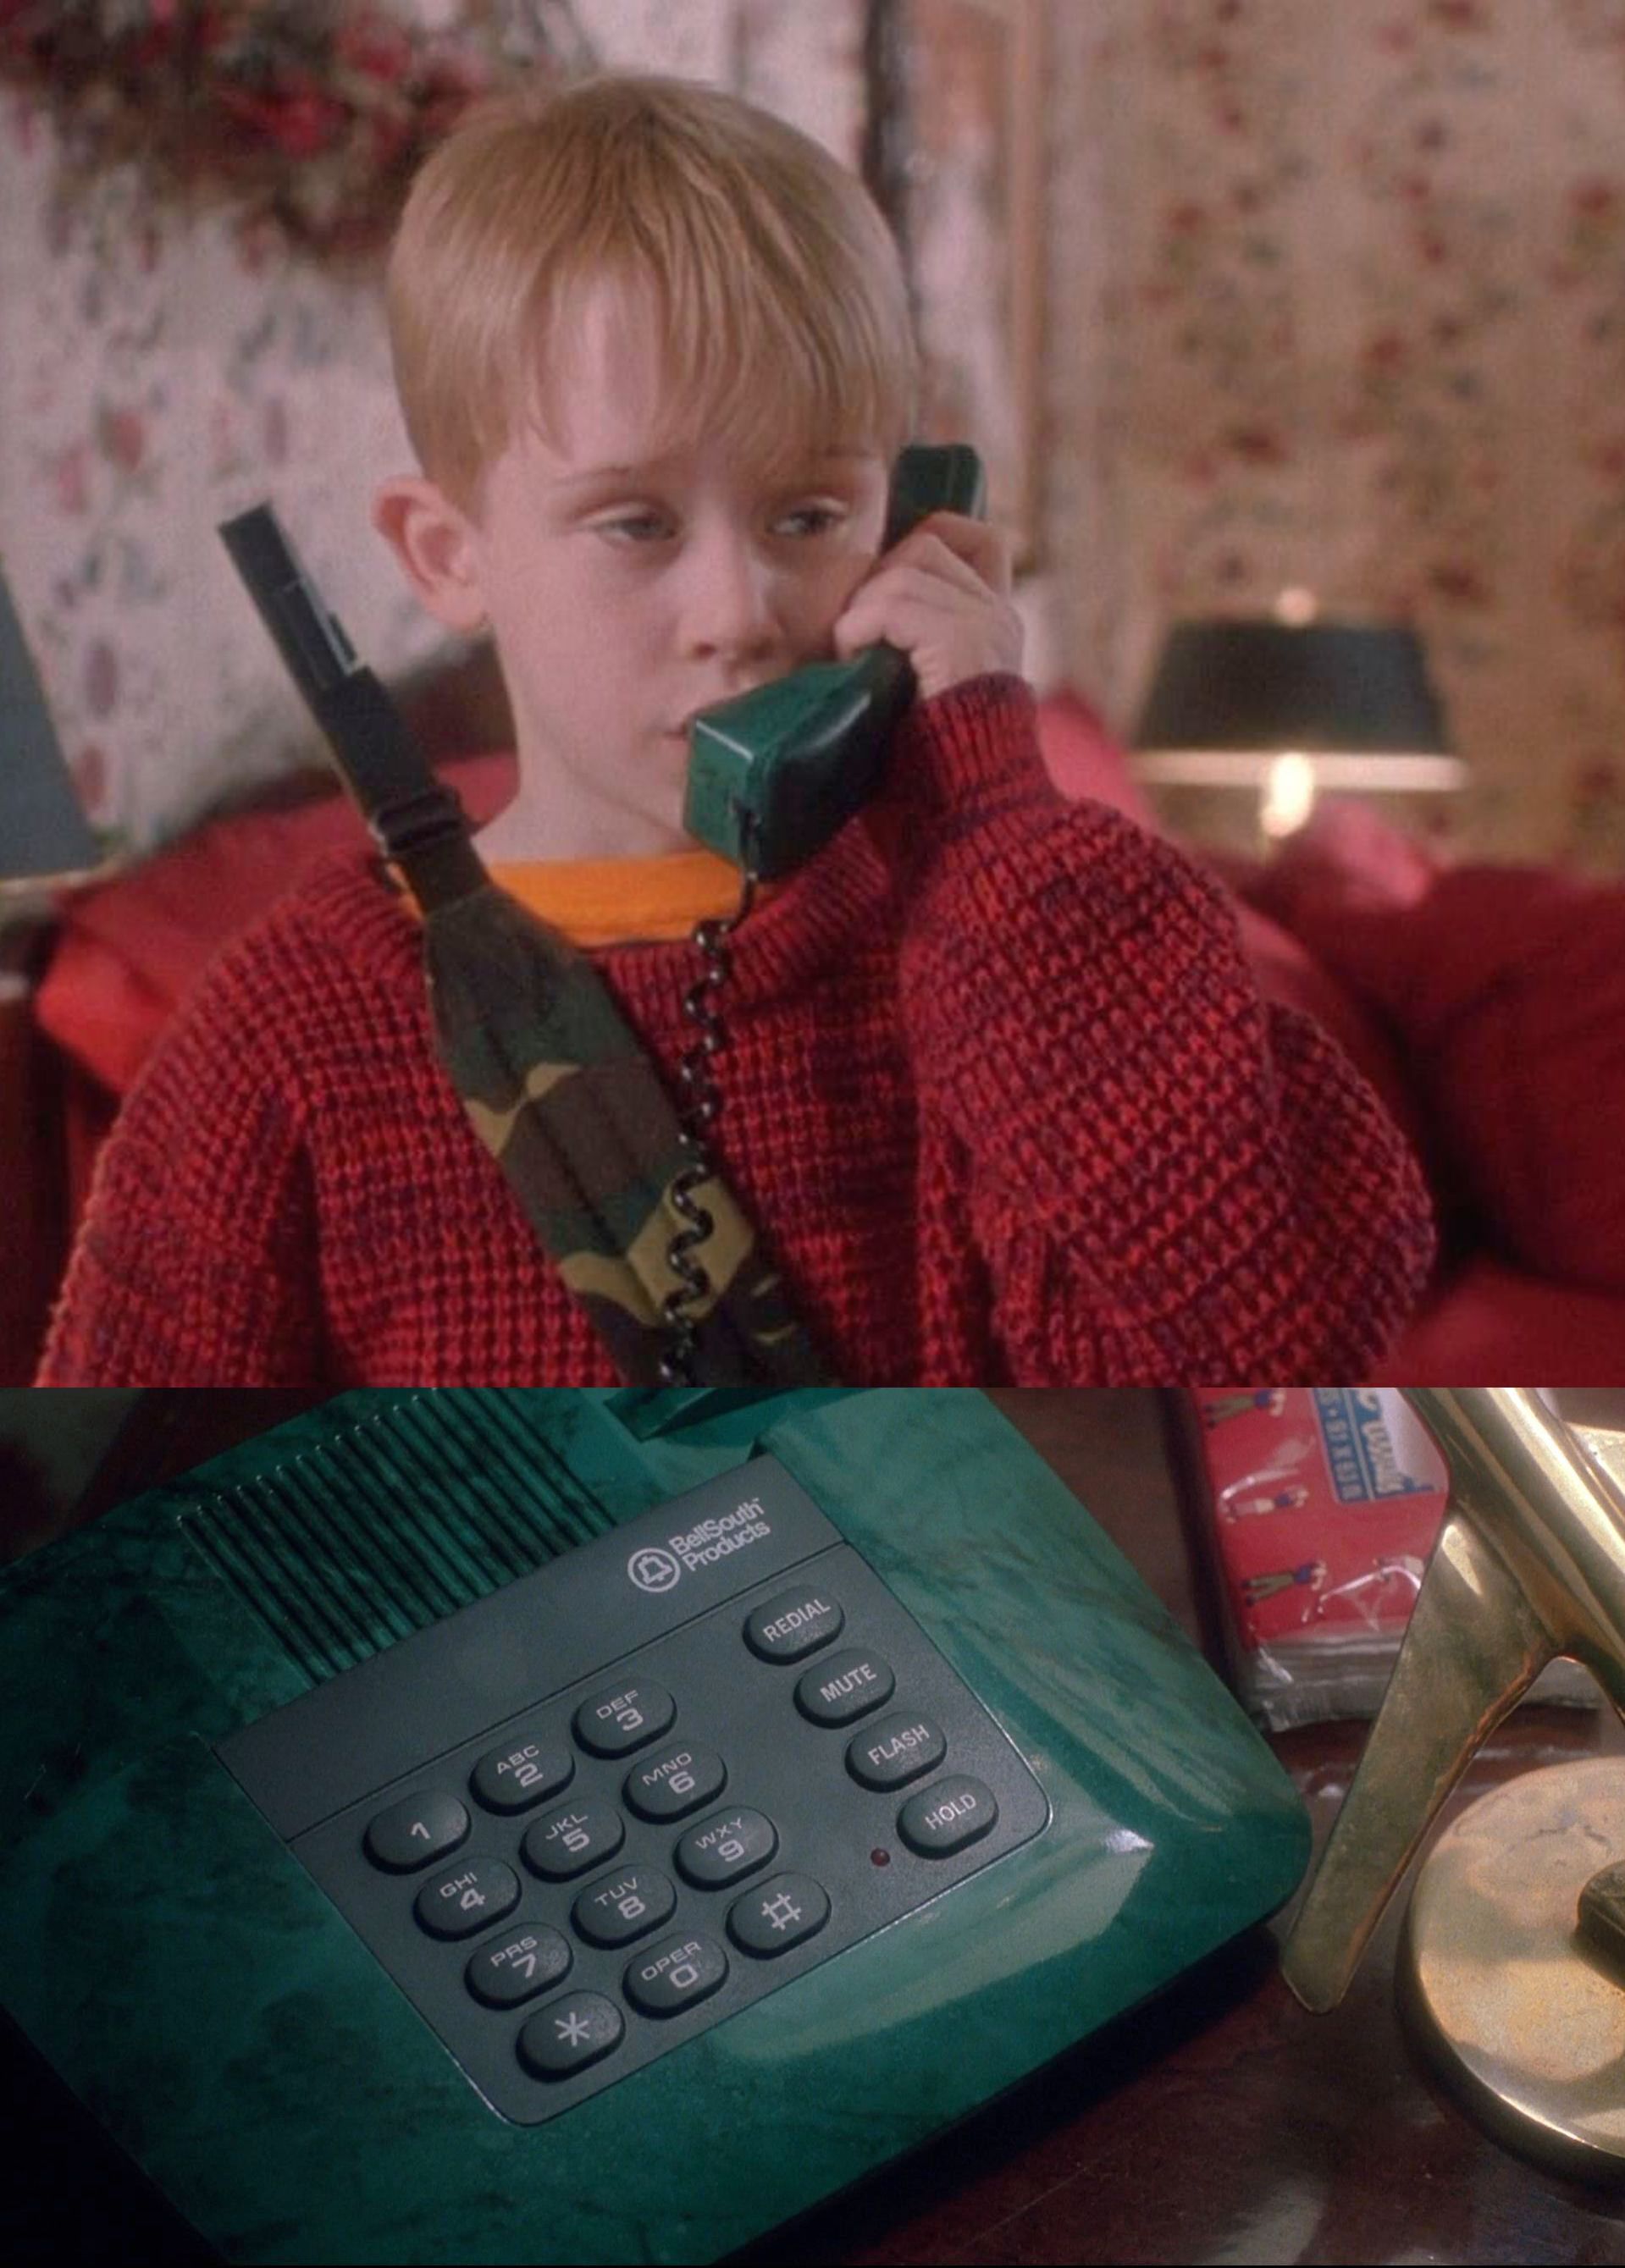 home alone telephone - BellSouth Products Redial Mute Def 3 Flash Abc Mno 6 20 0000 Hold 1 Jkl S Wxy 9 Ghi Tuv 8 30 # # Pas 7 Oper